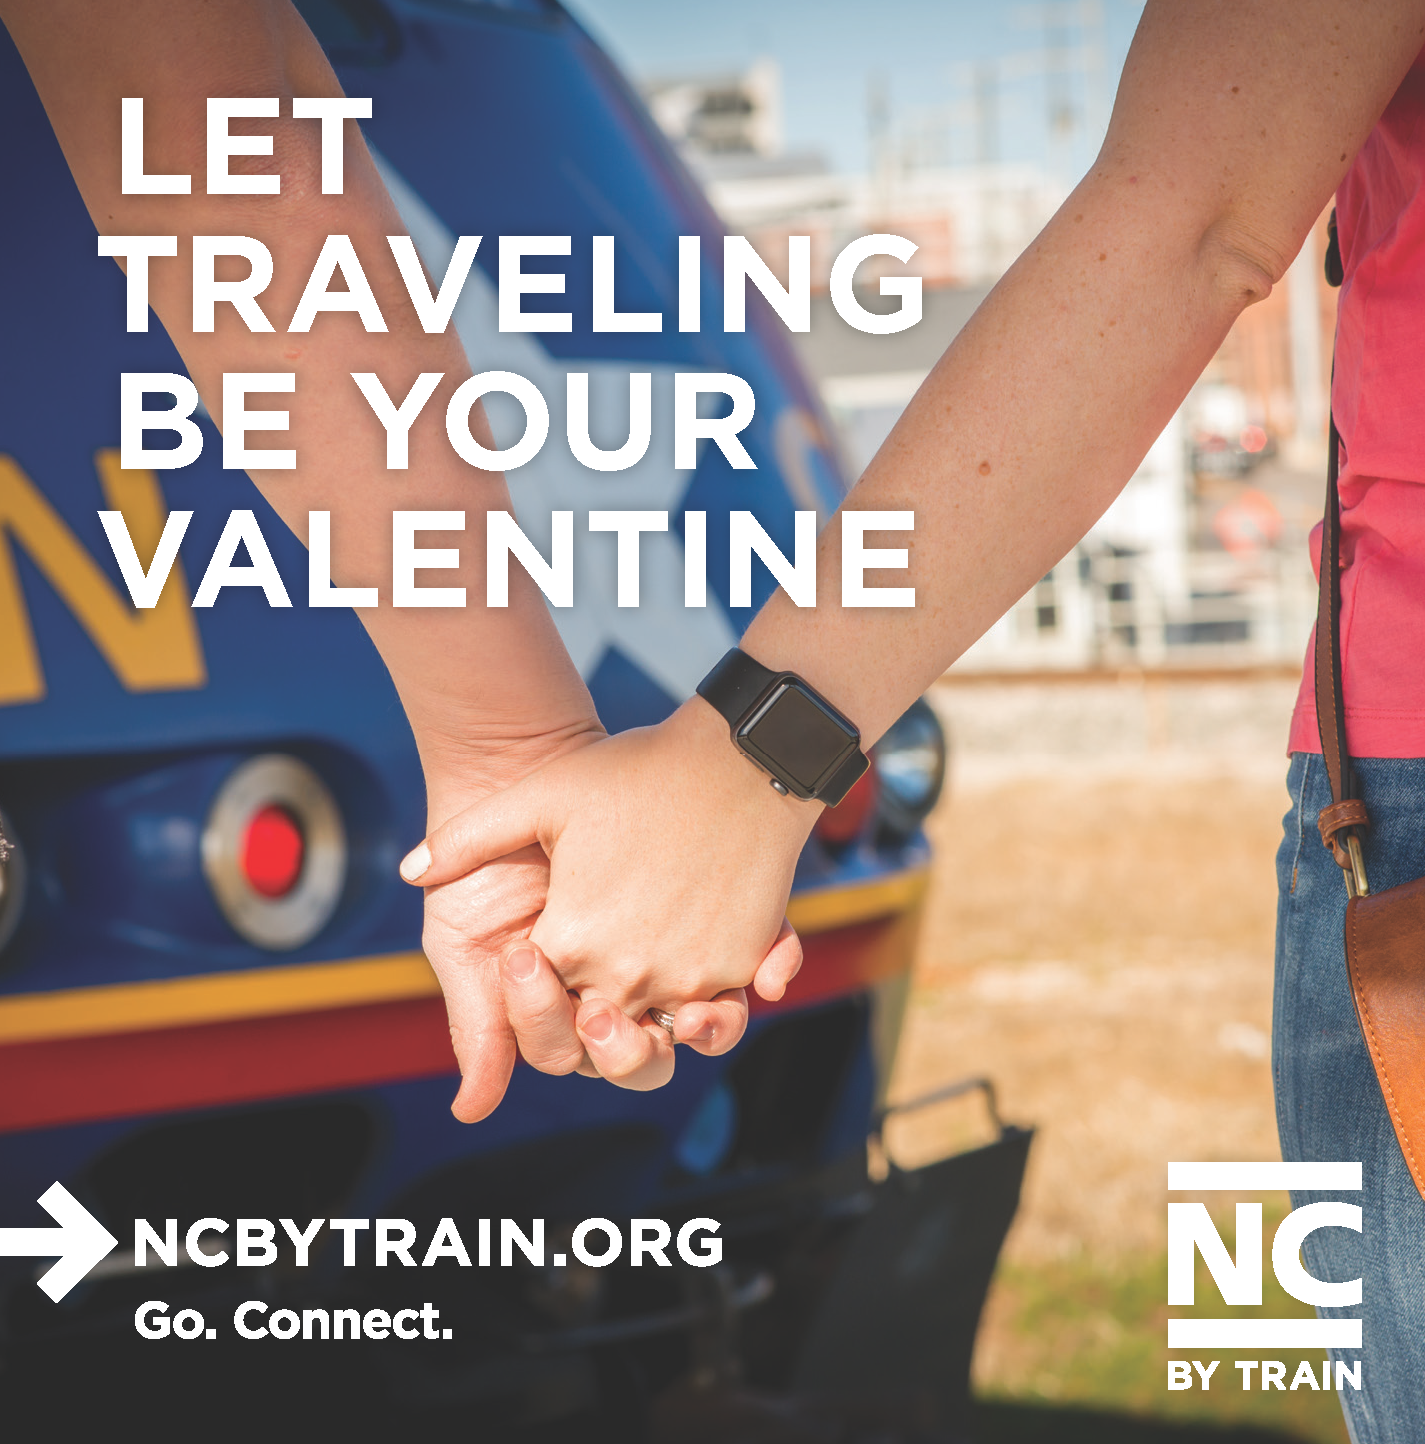 Amtrak Offers Valentine's Day Buy One, Get One Free Ticket Special